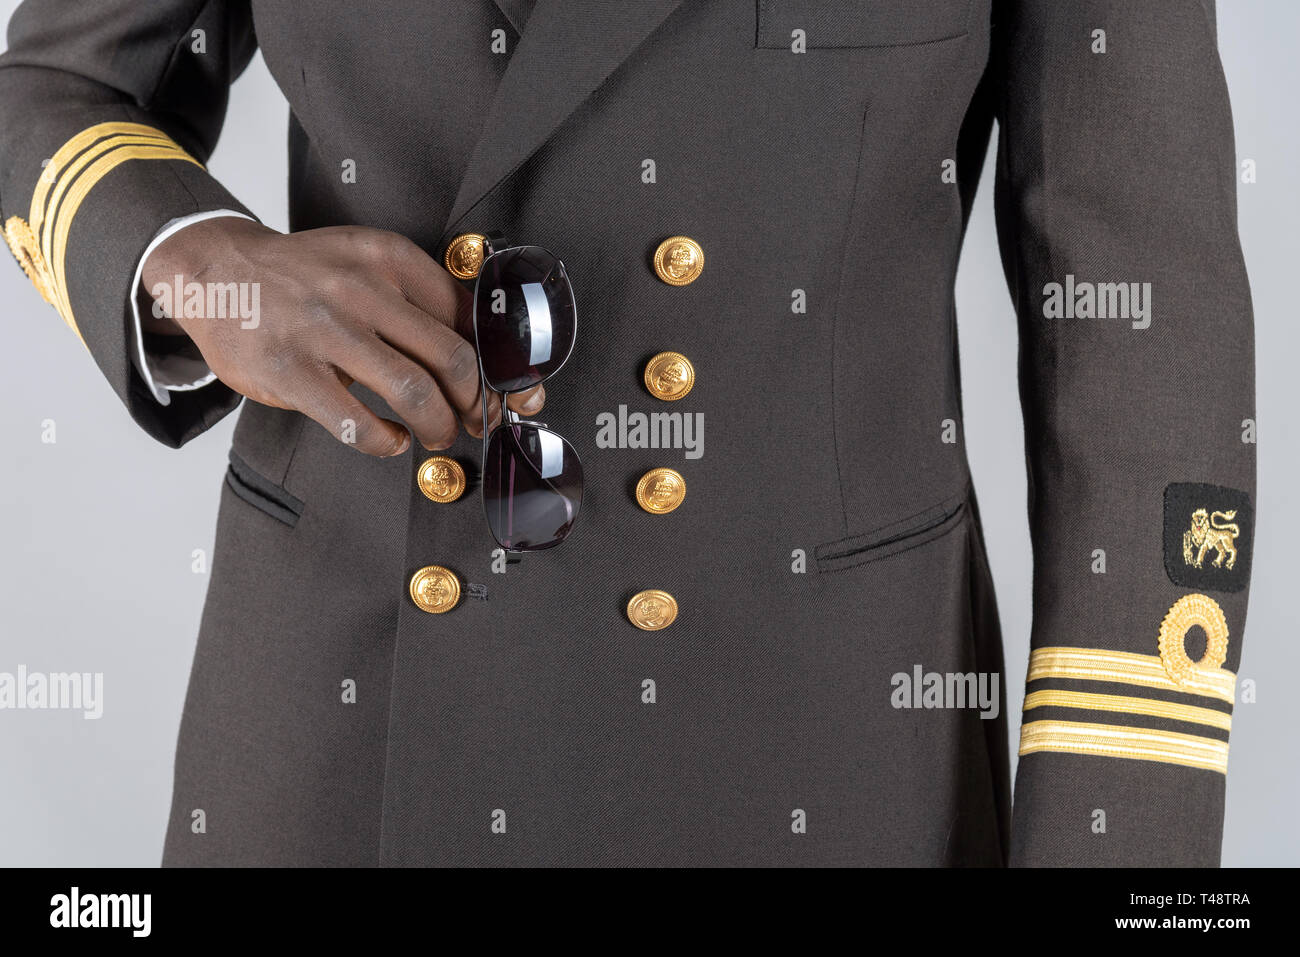 Lieutenant Commander wearing uniform of the South African Navy. Holding a pair of sunglasses. Stock Photo